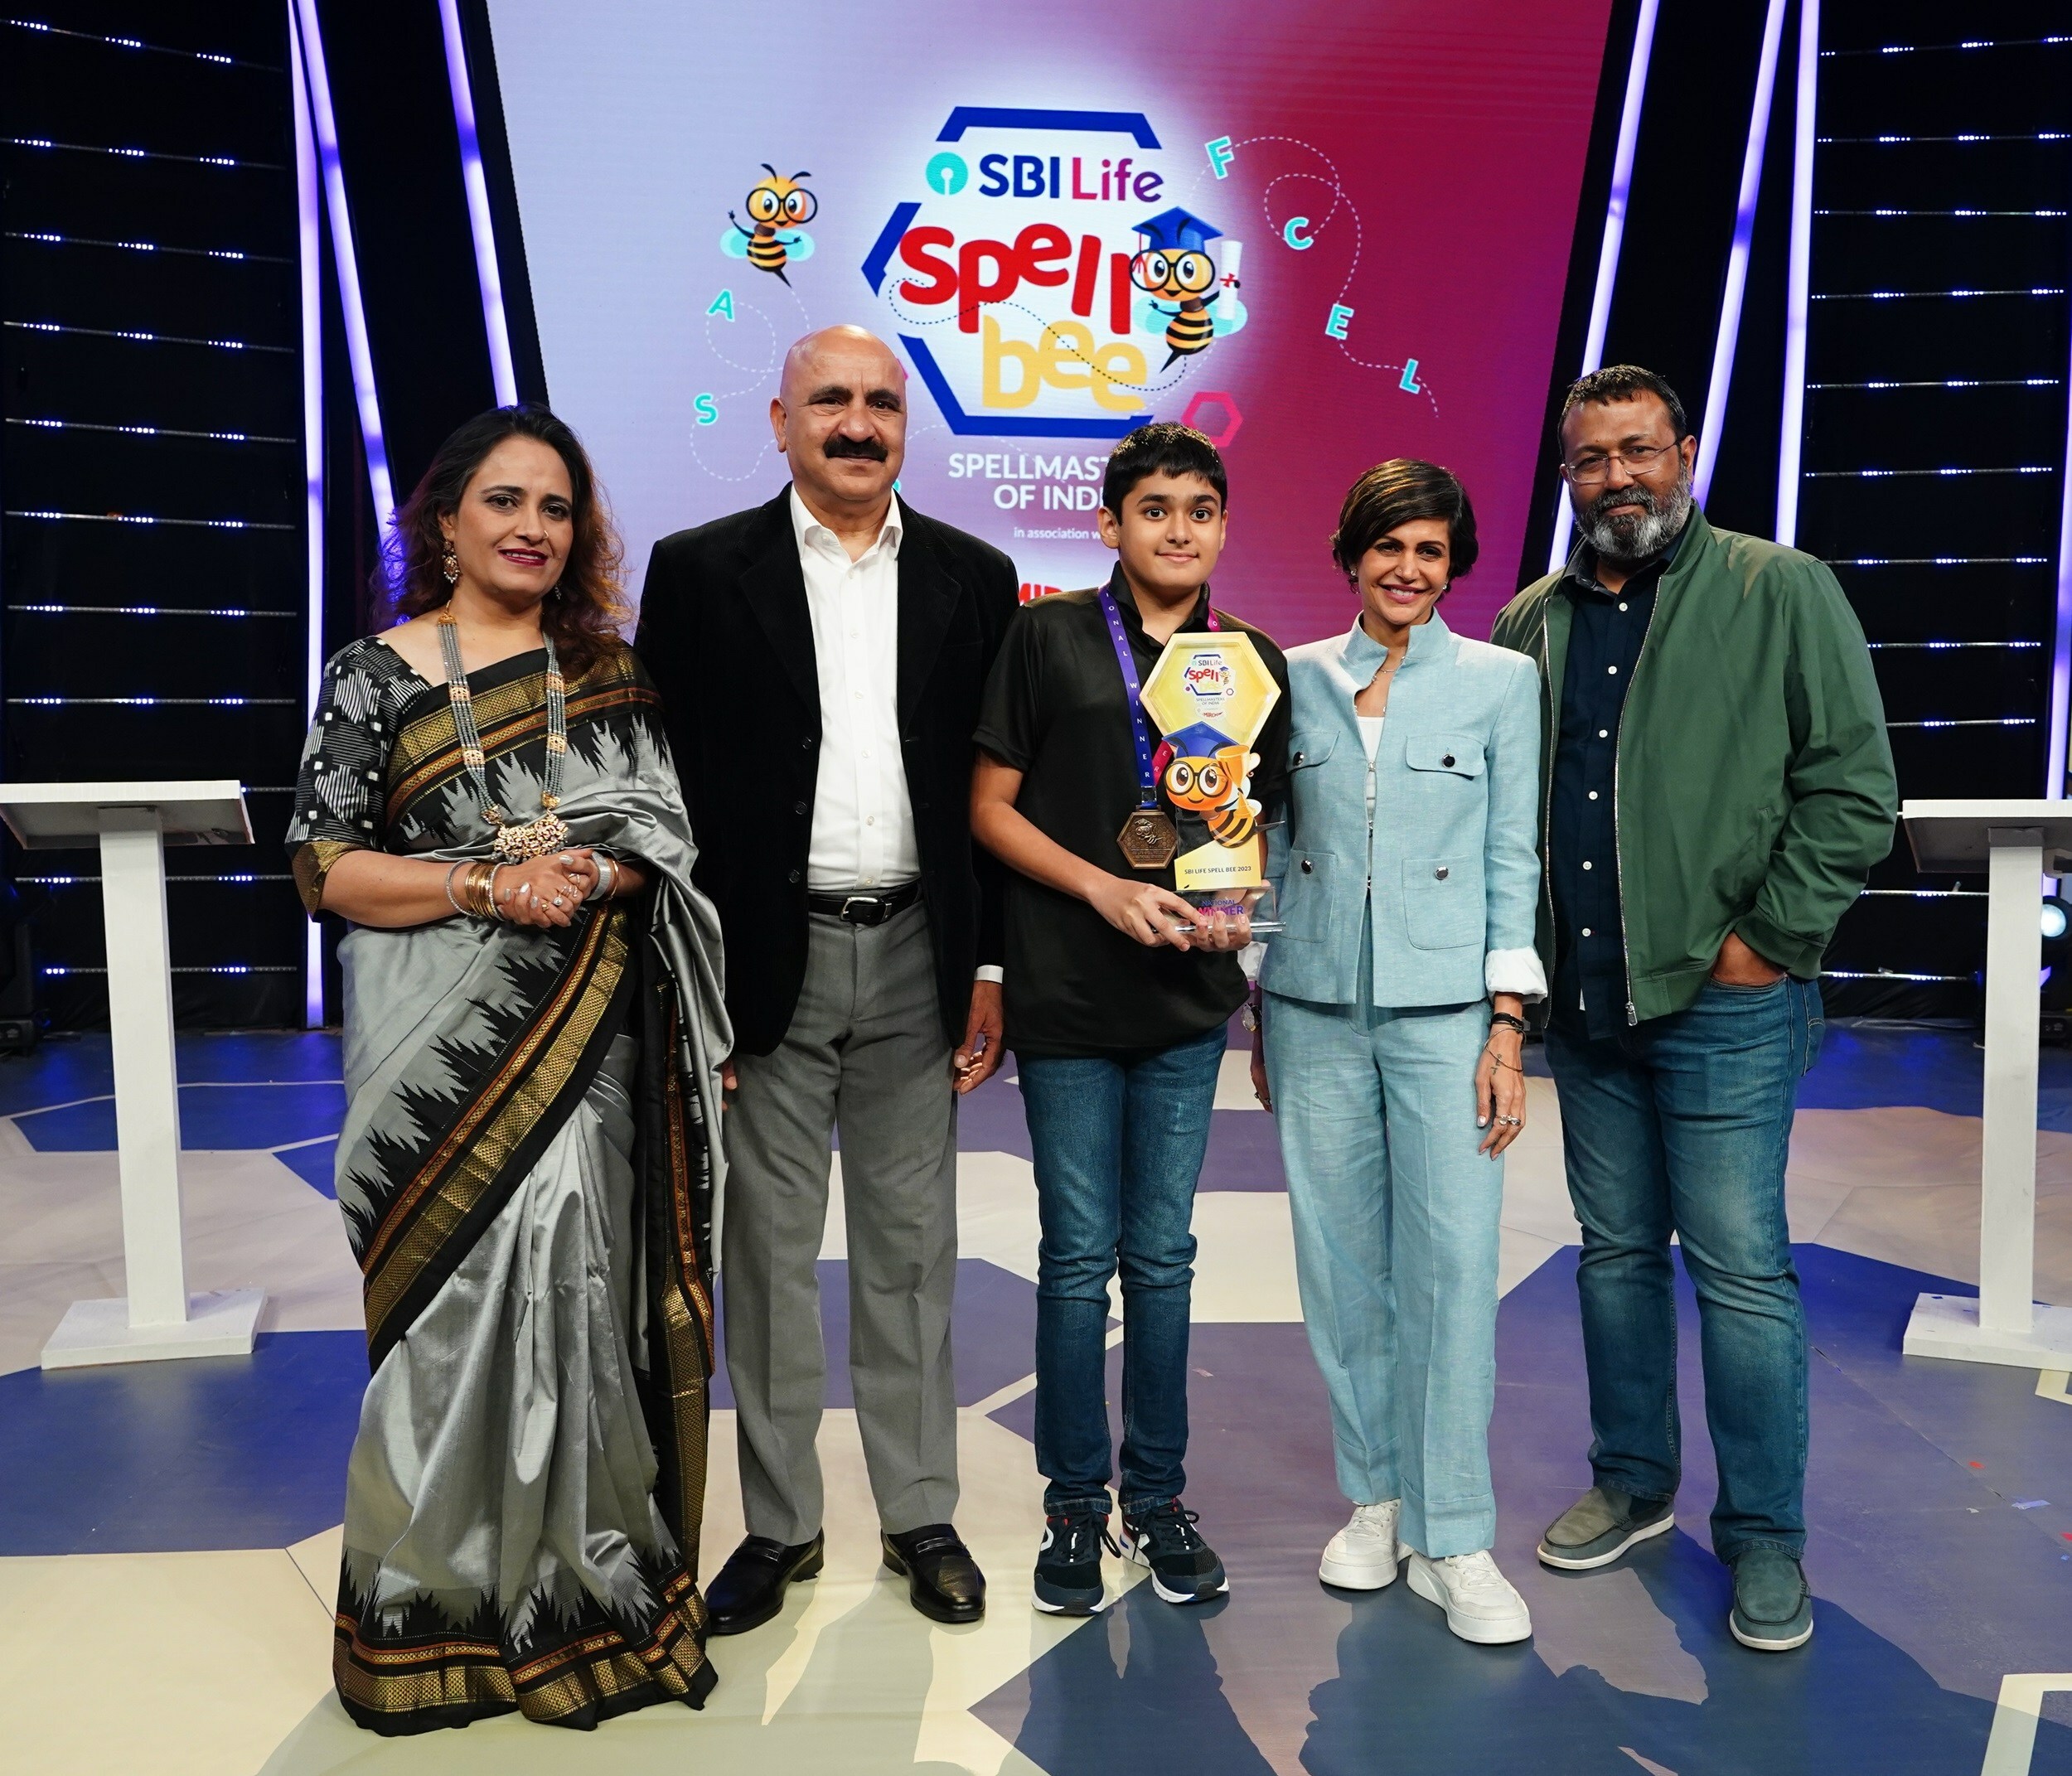 Rayaan Naveed Siddiqui of Mumbai bags the 'Spell Master of India' Title at SBI Life Spell Bee Season 13 thereby empowering the youth of India to continue to fulfill their dreams and spark progress